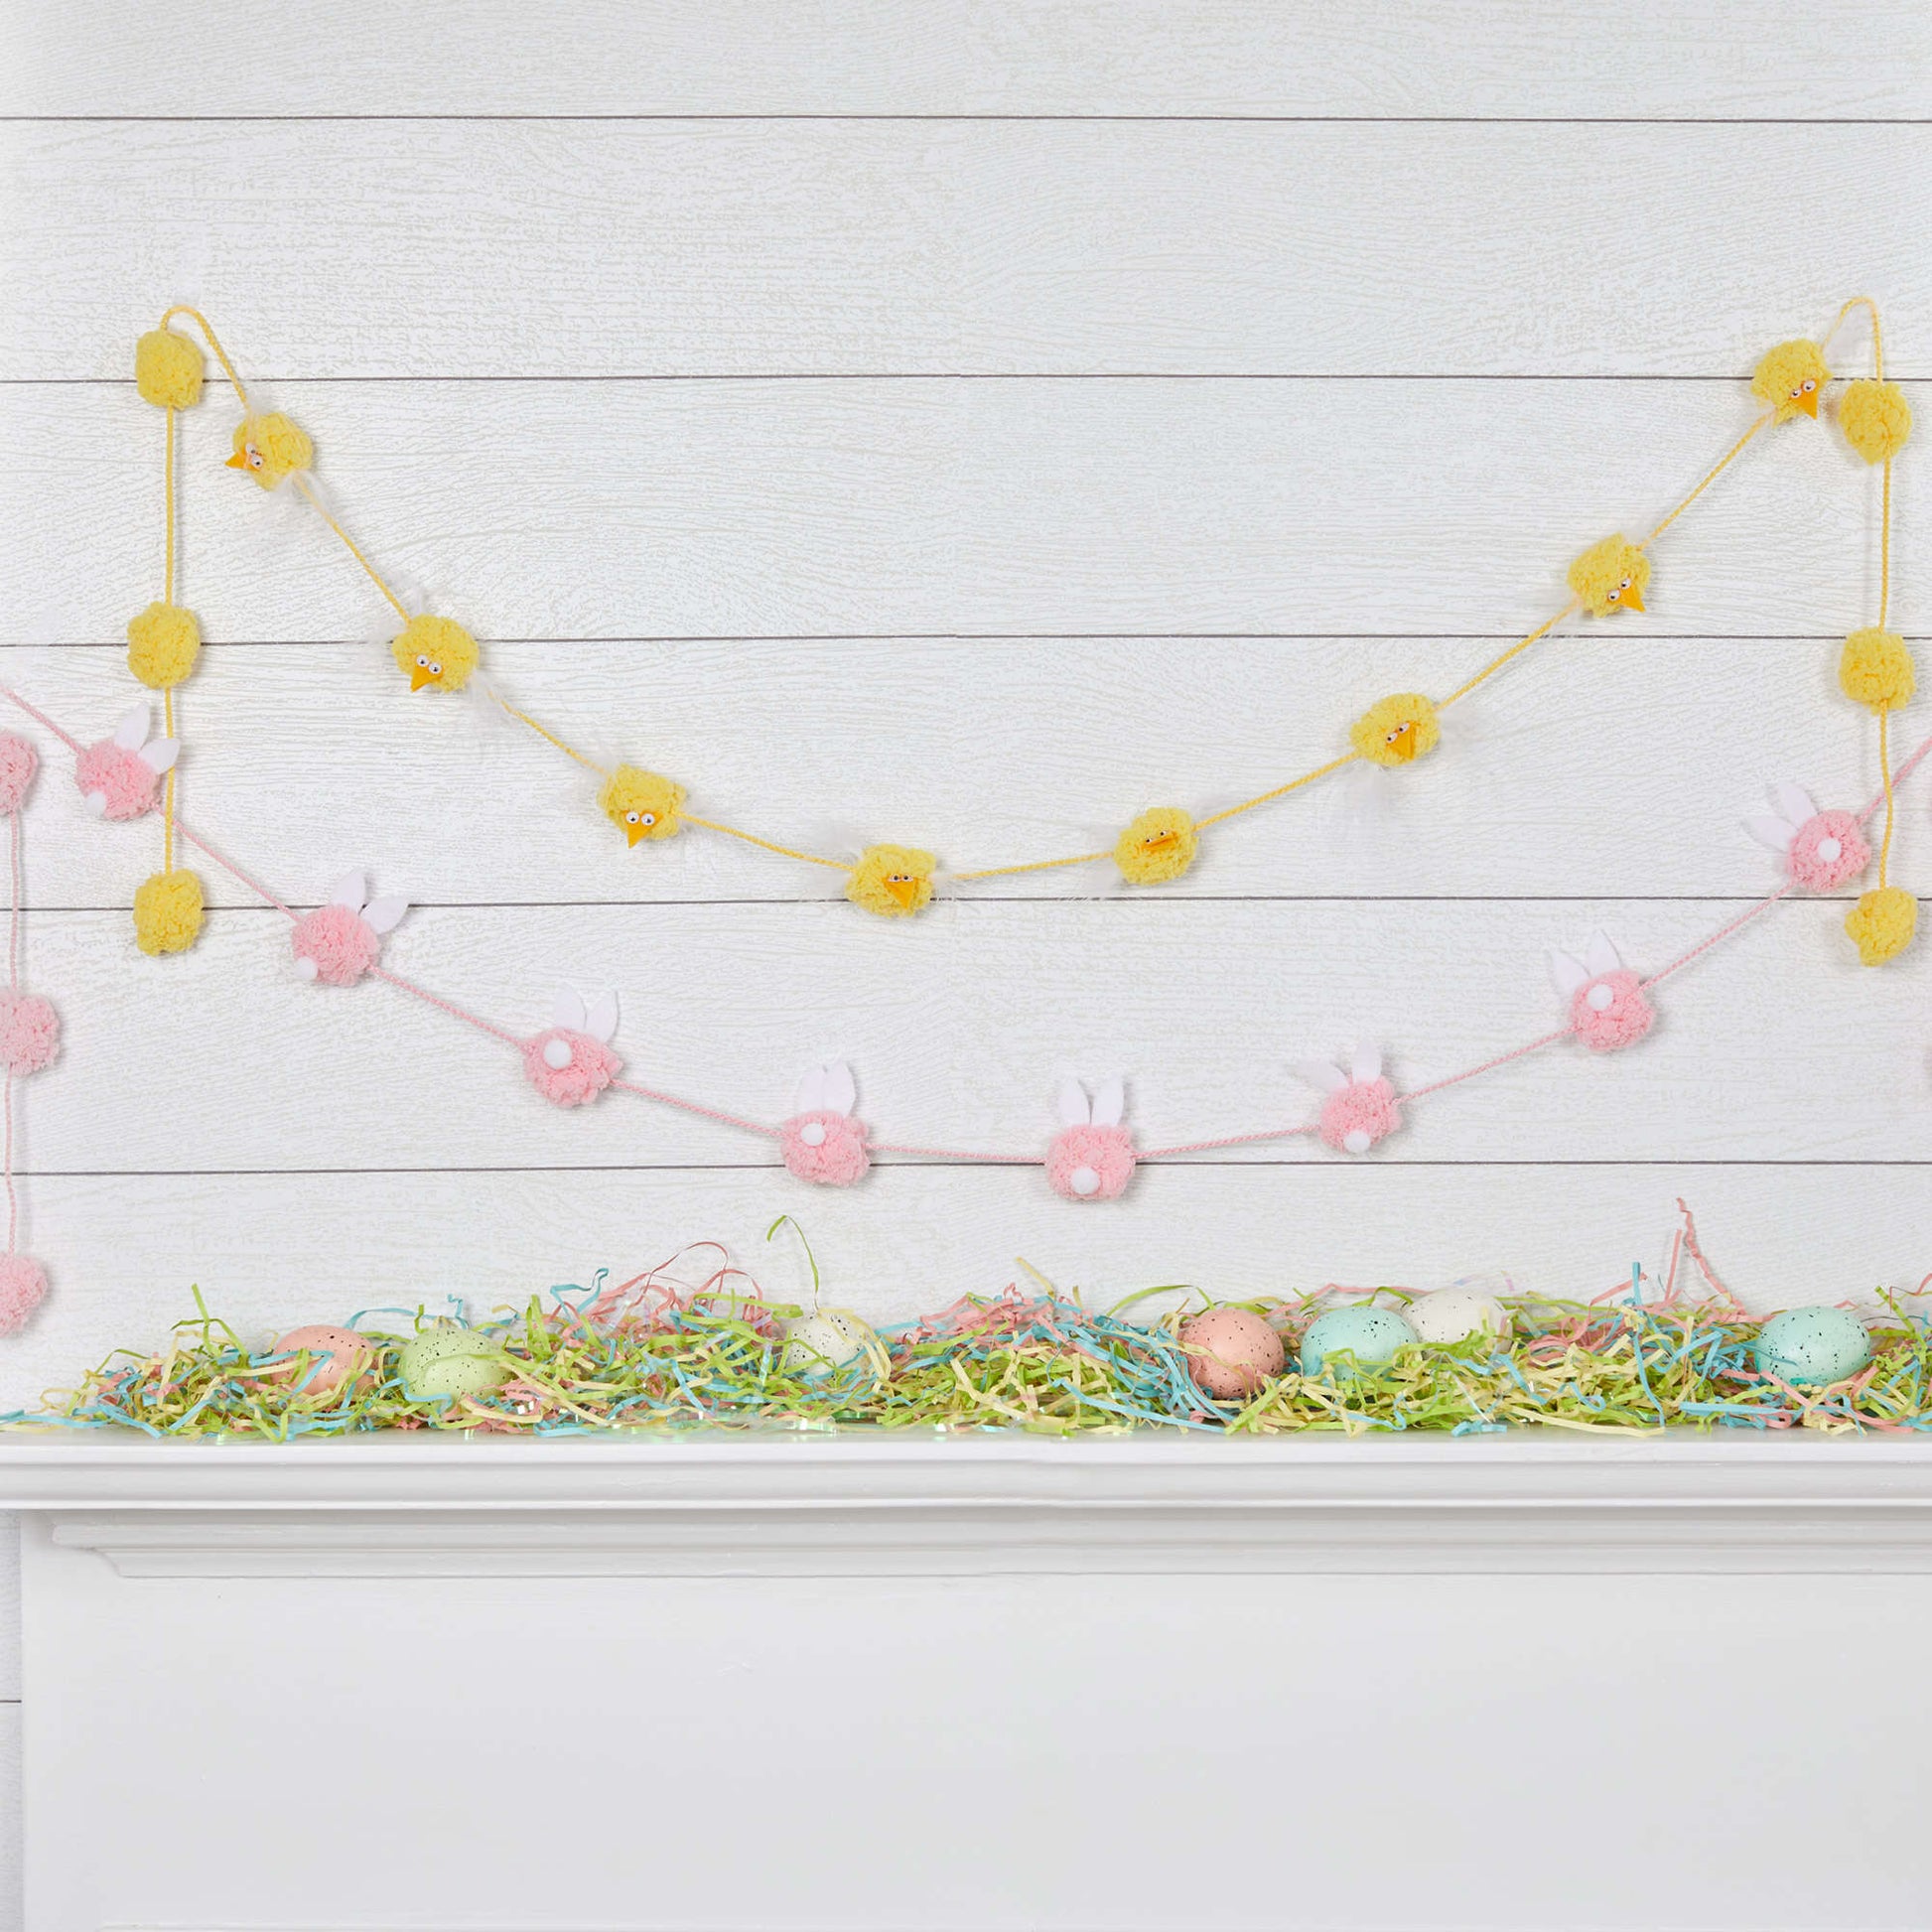 Free Red Heart Bunny And Chick Party Decorations Craft Pattern